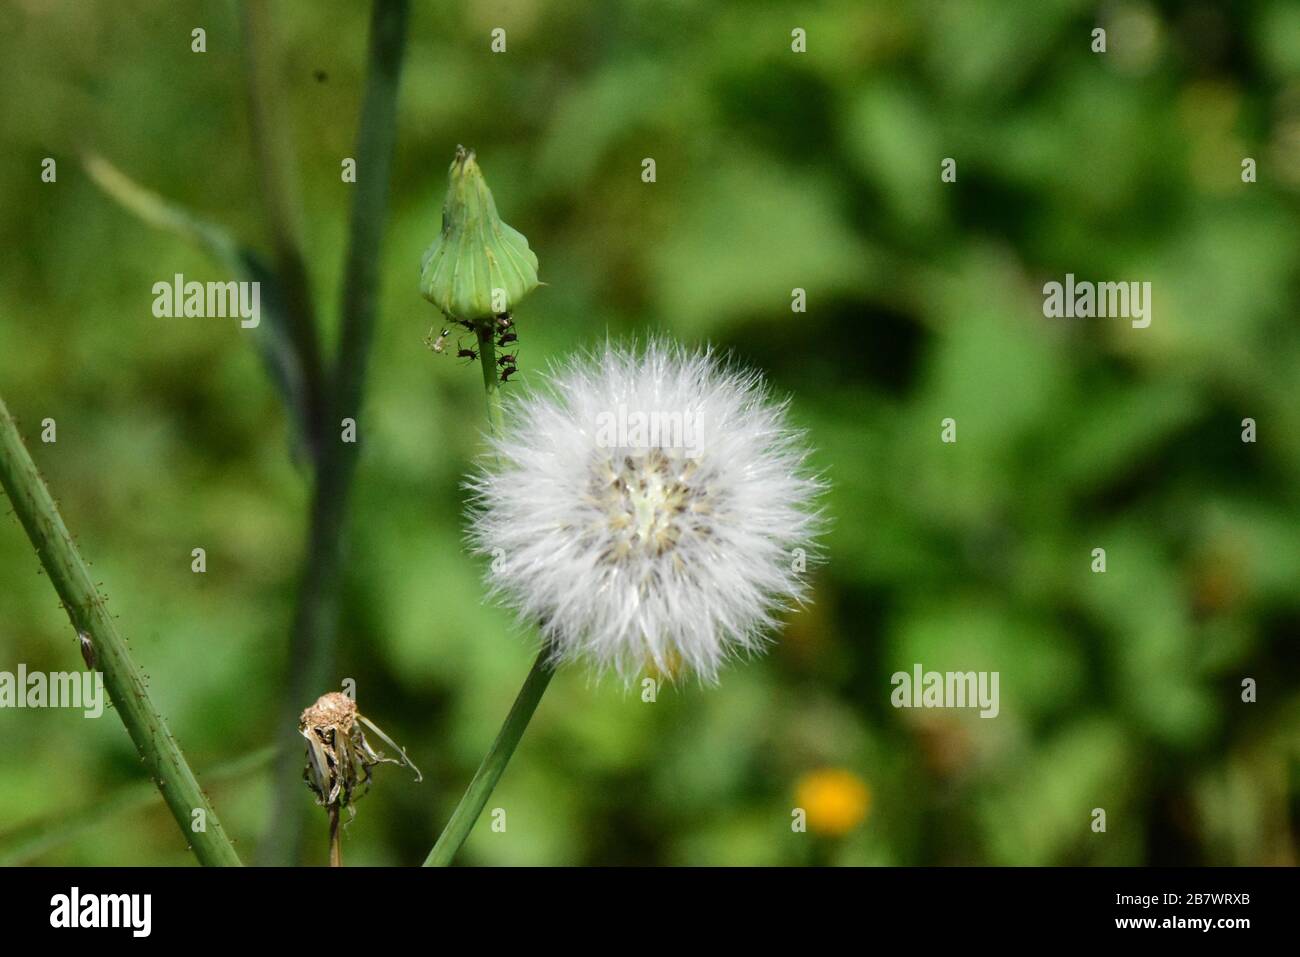 White flower of an African wild plant that looks like a dandelion Stock Photo